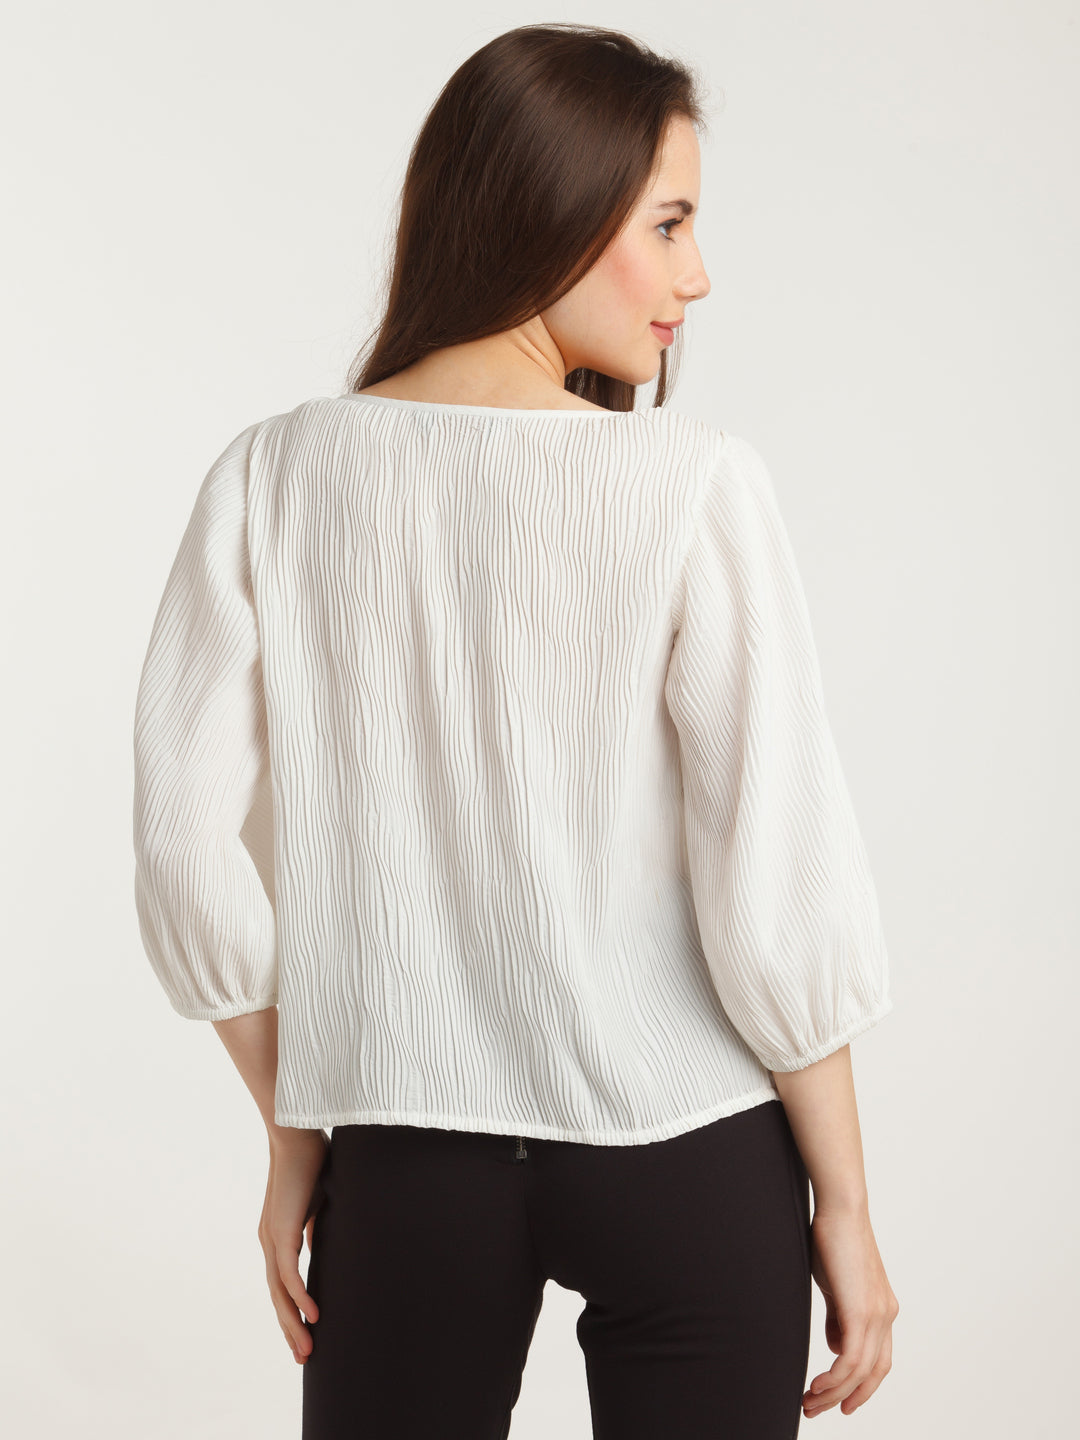 White Solid Pleated Top For Women